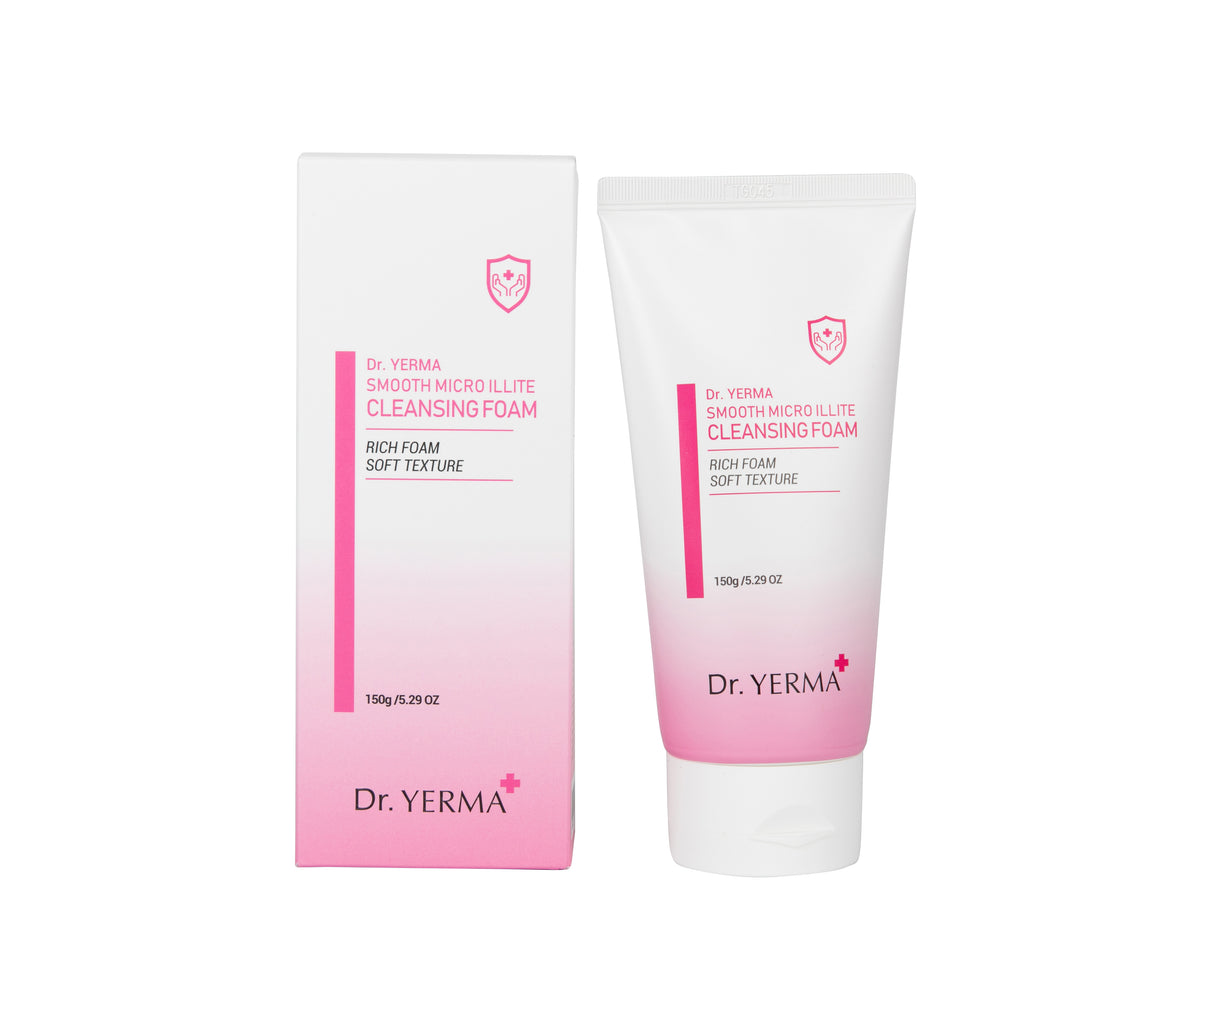 DR YERMA SMOOTH MICRO ILLITE CLEANSING FOAM